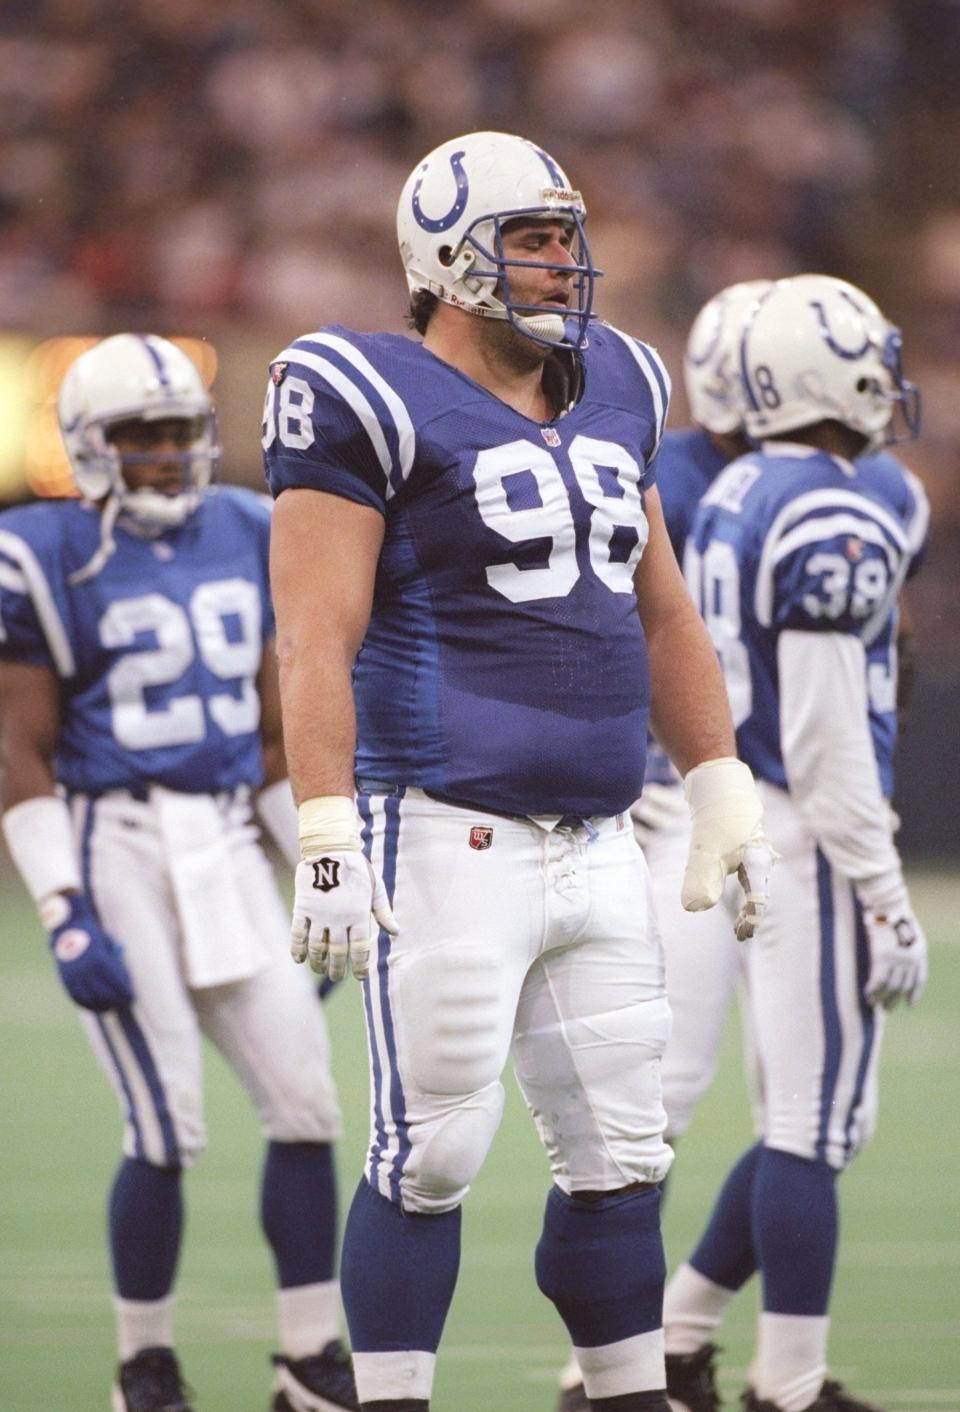 Tony Siragusa played on the Indianapolis Colts defensive line from 1990-1996 and helped lead the team to an AFC Championship Game appearance following the 1995 season.